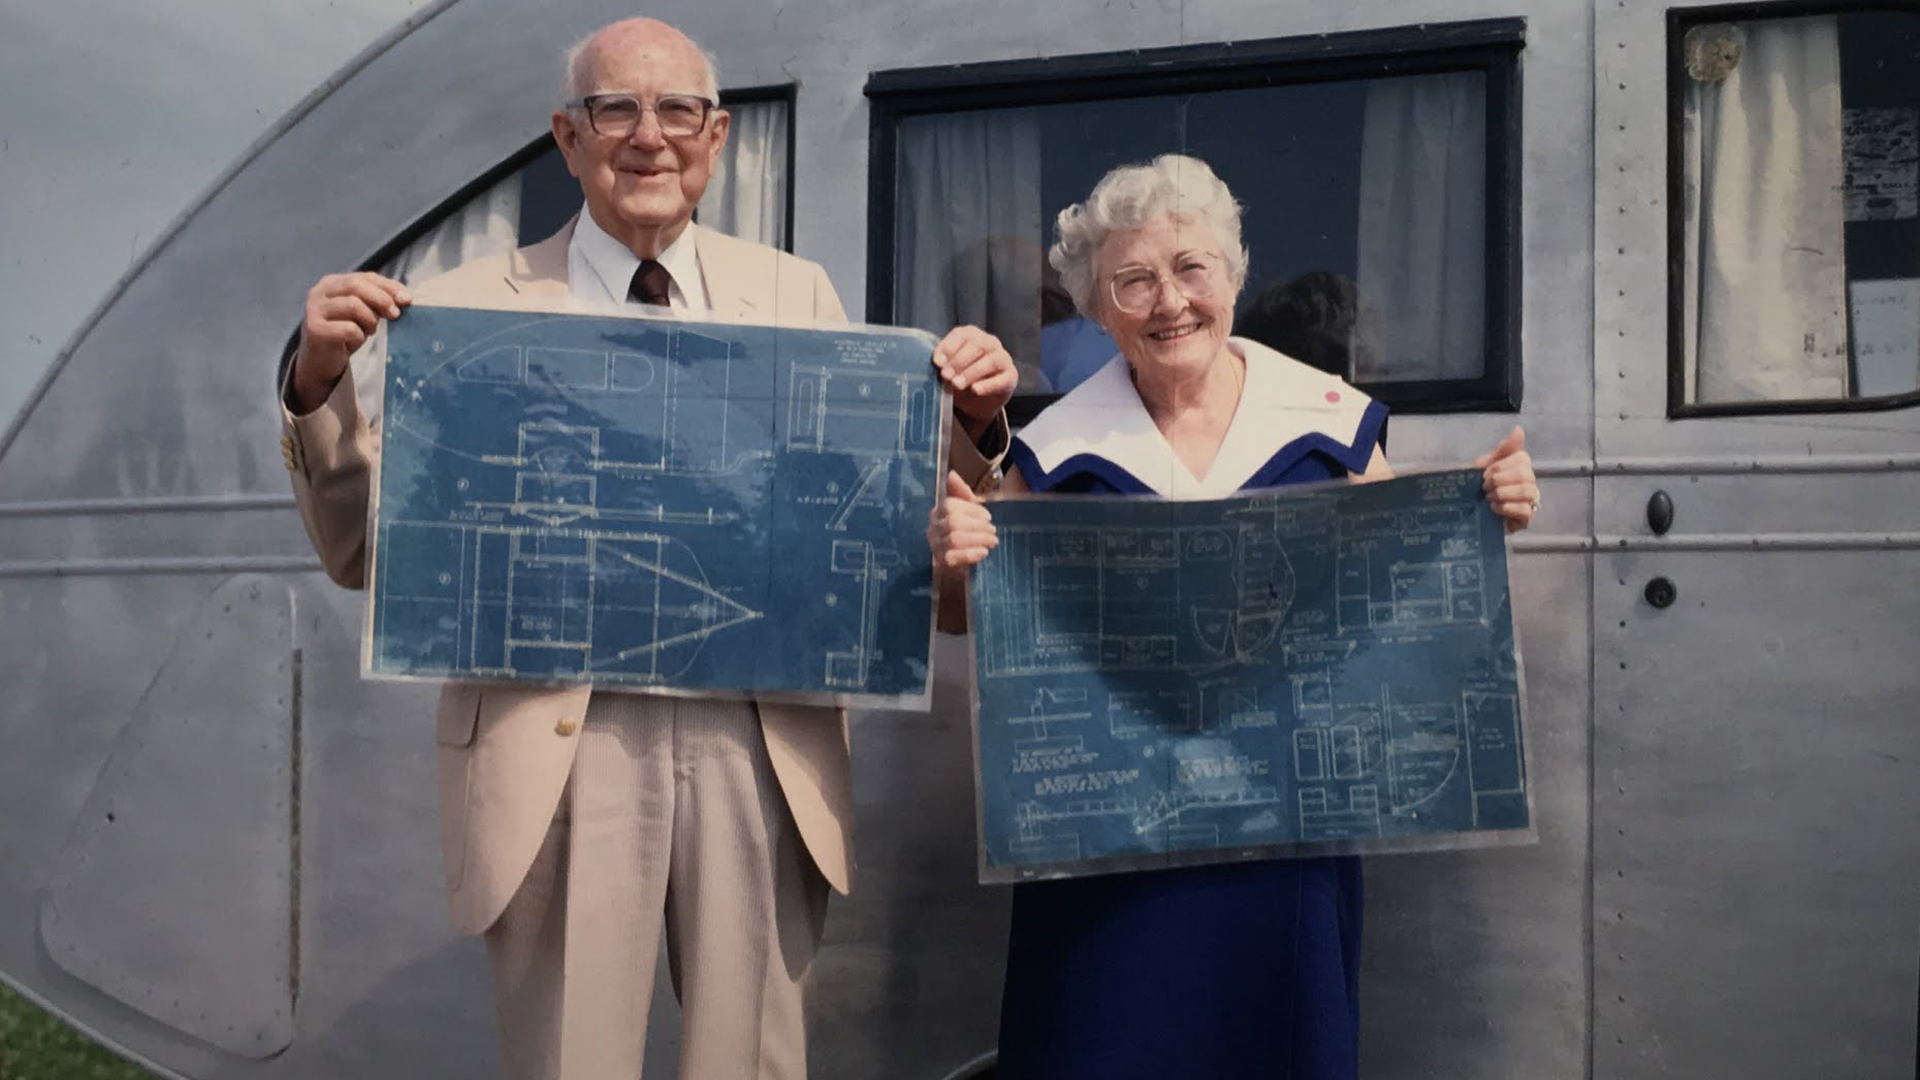 Dr. and Mrs. Holman holding up the Airstream Torpedo travel trailer blueprint while standing in front of the Airstream trailer